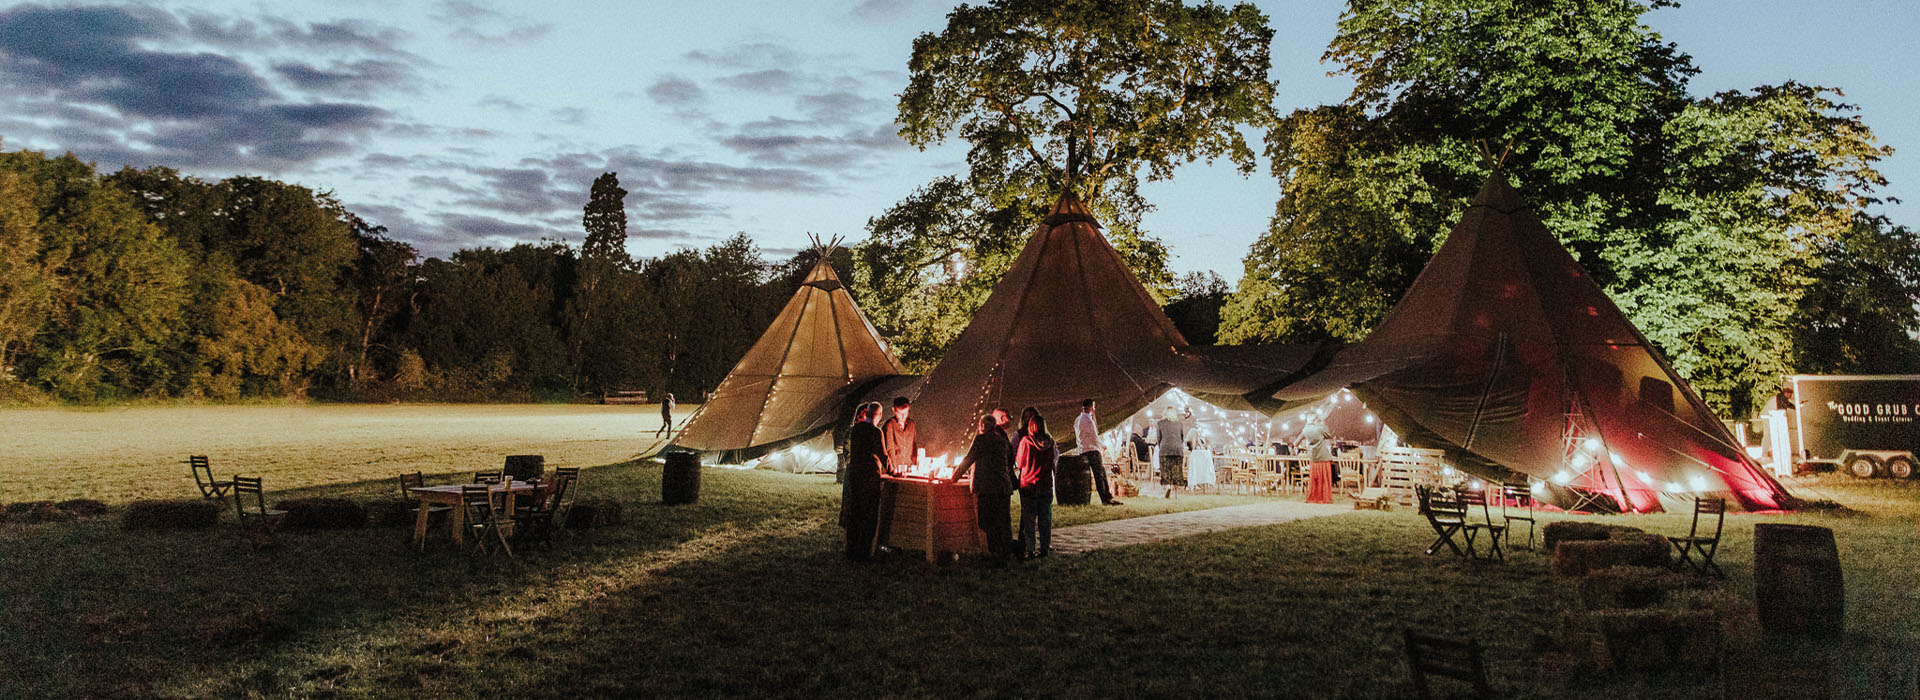 An outdoor image in a field of a tipi wedding venue.